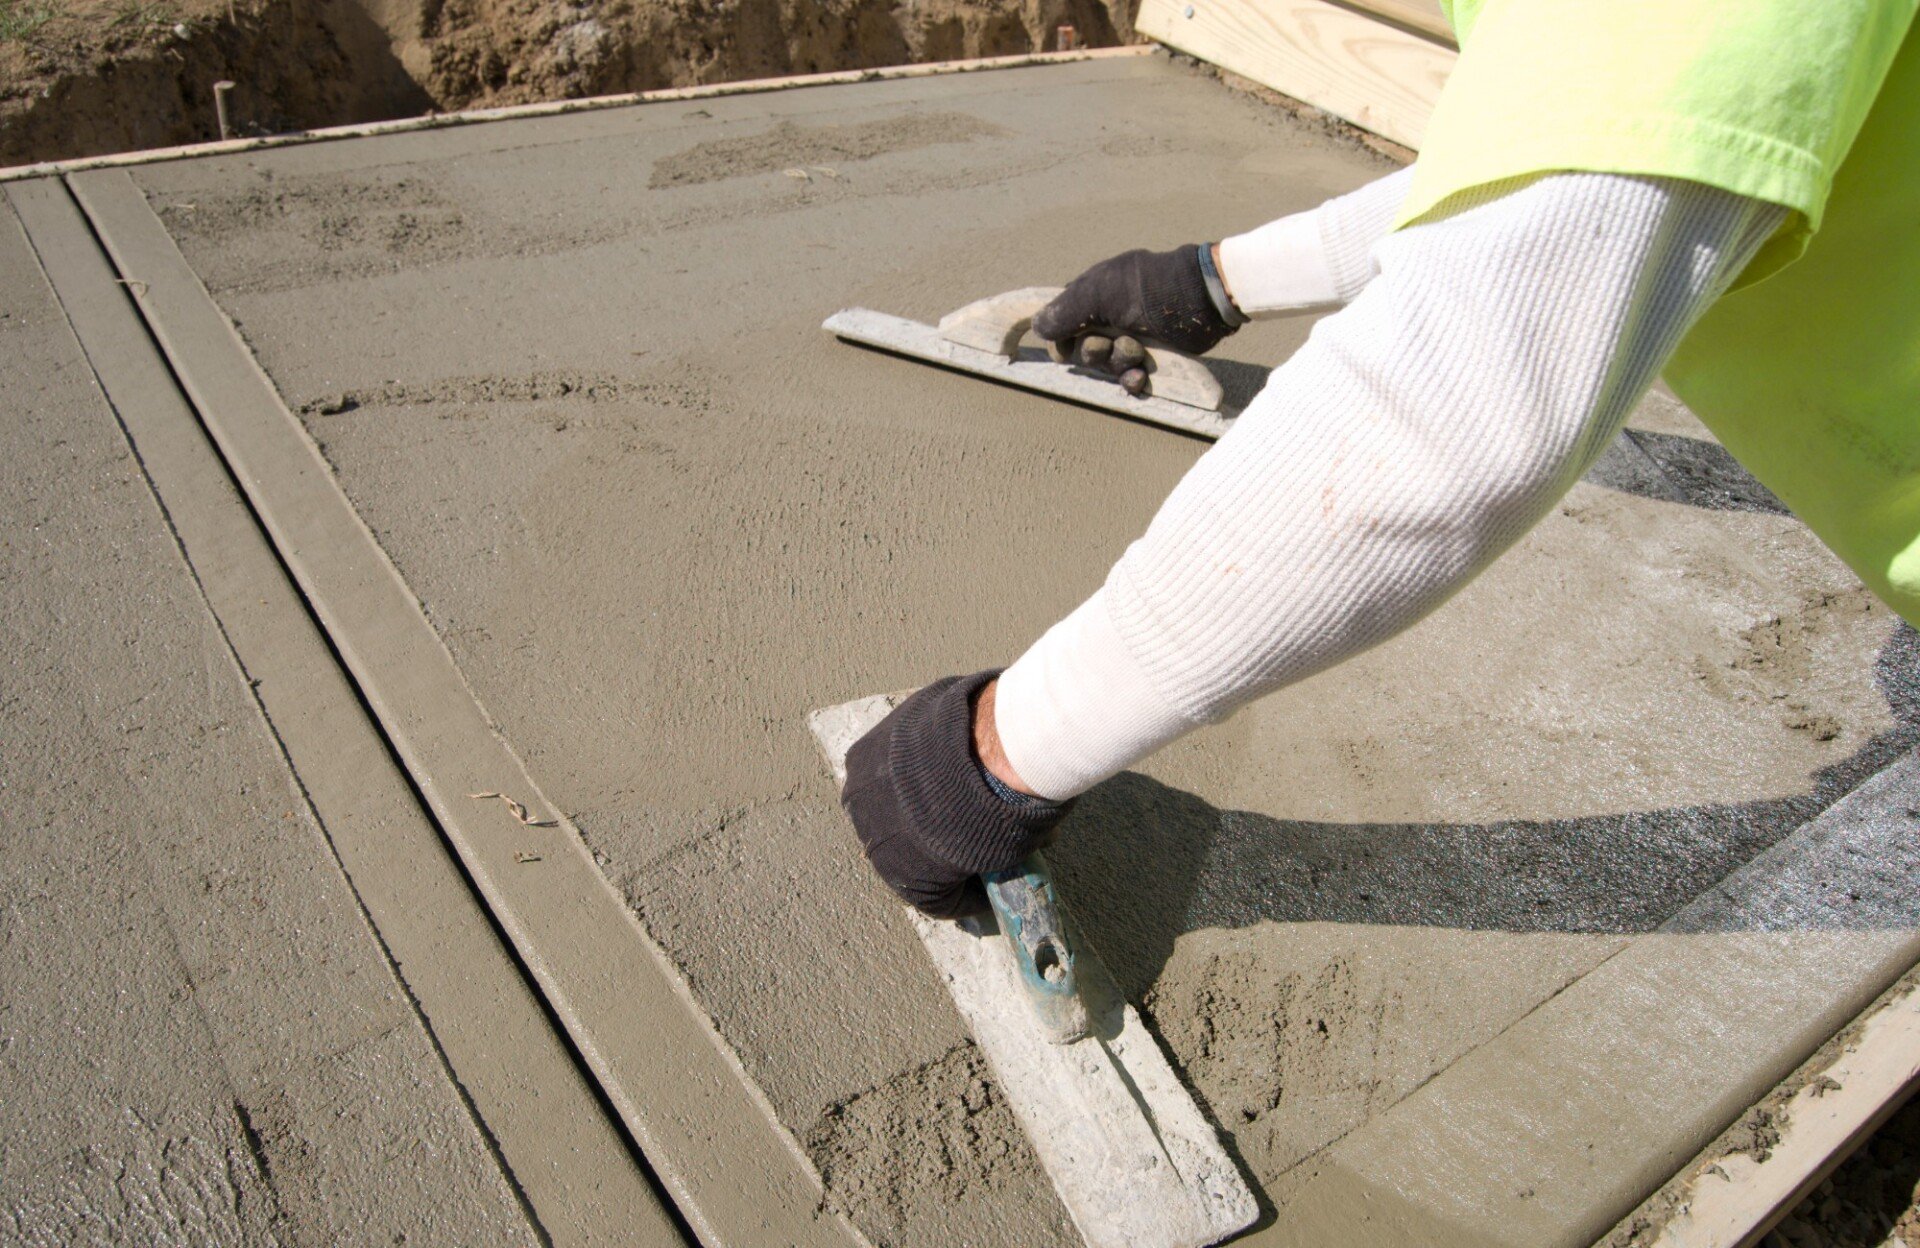 A worker, likely a stamped concrete contractor, wearing a long-sleeve shirt and gloves, smooths out wet cement on a flat surface using two trowels. The freshly poured concrete suggests an ongoing construction or paving project in Boynton Beach, Palm Beach County.